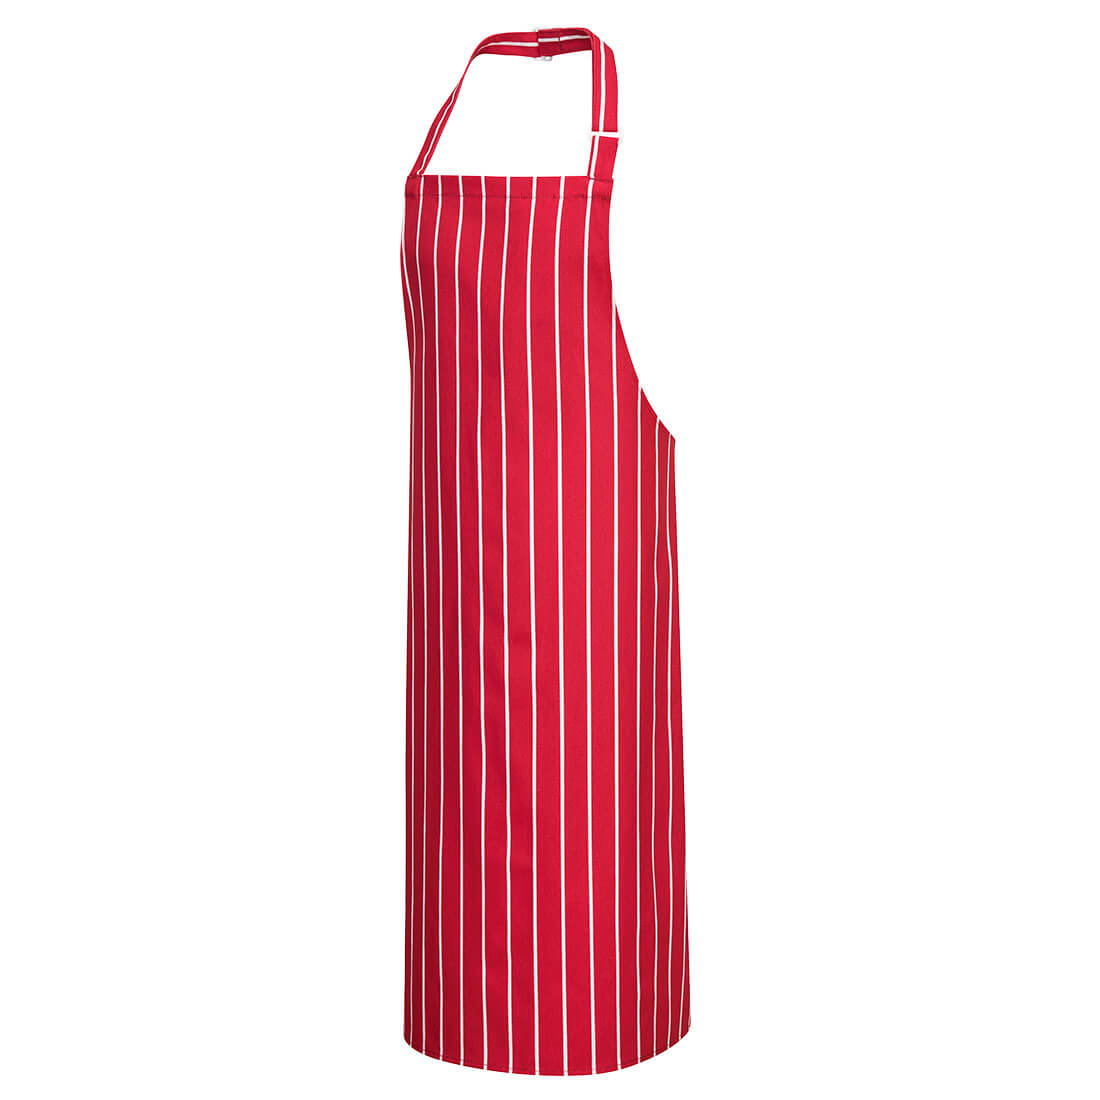 Butchers Apron - Red/White or Navy/White